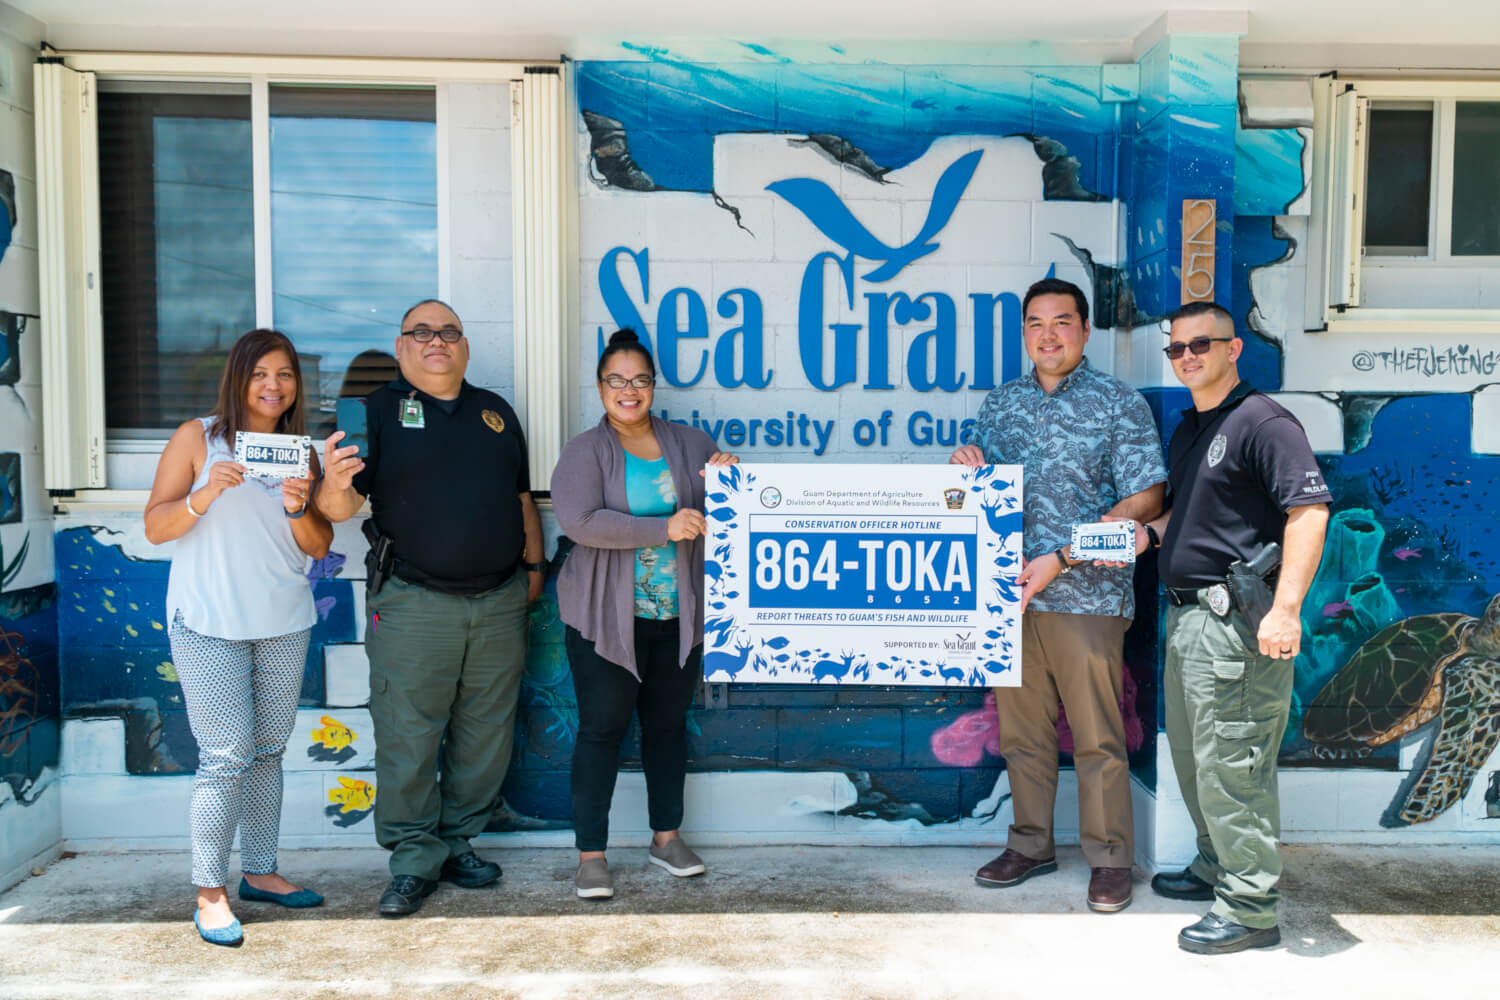 UOG Sea Grant provided the hotline phone for island residents to report threats to wildlife